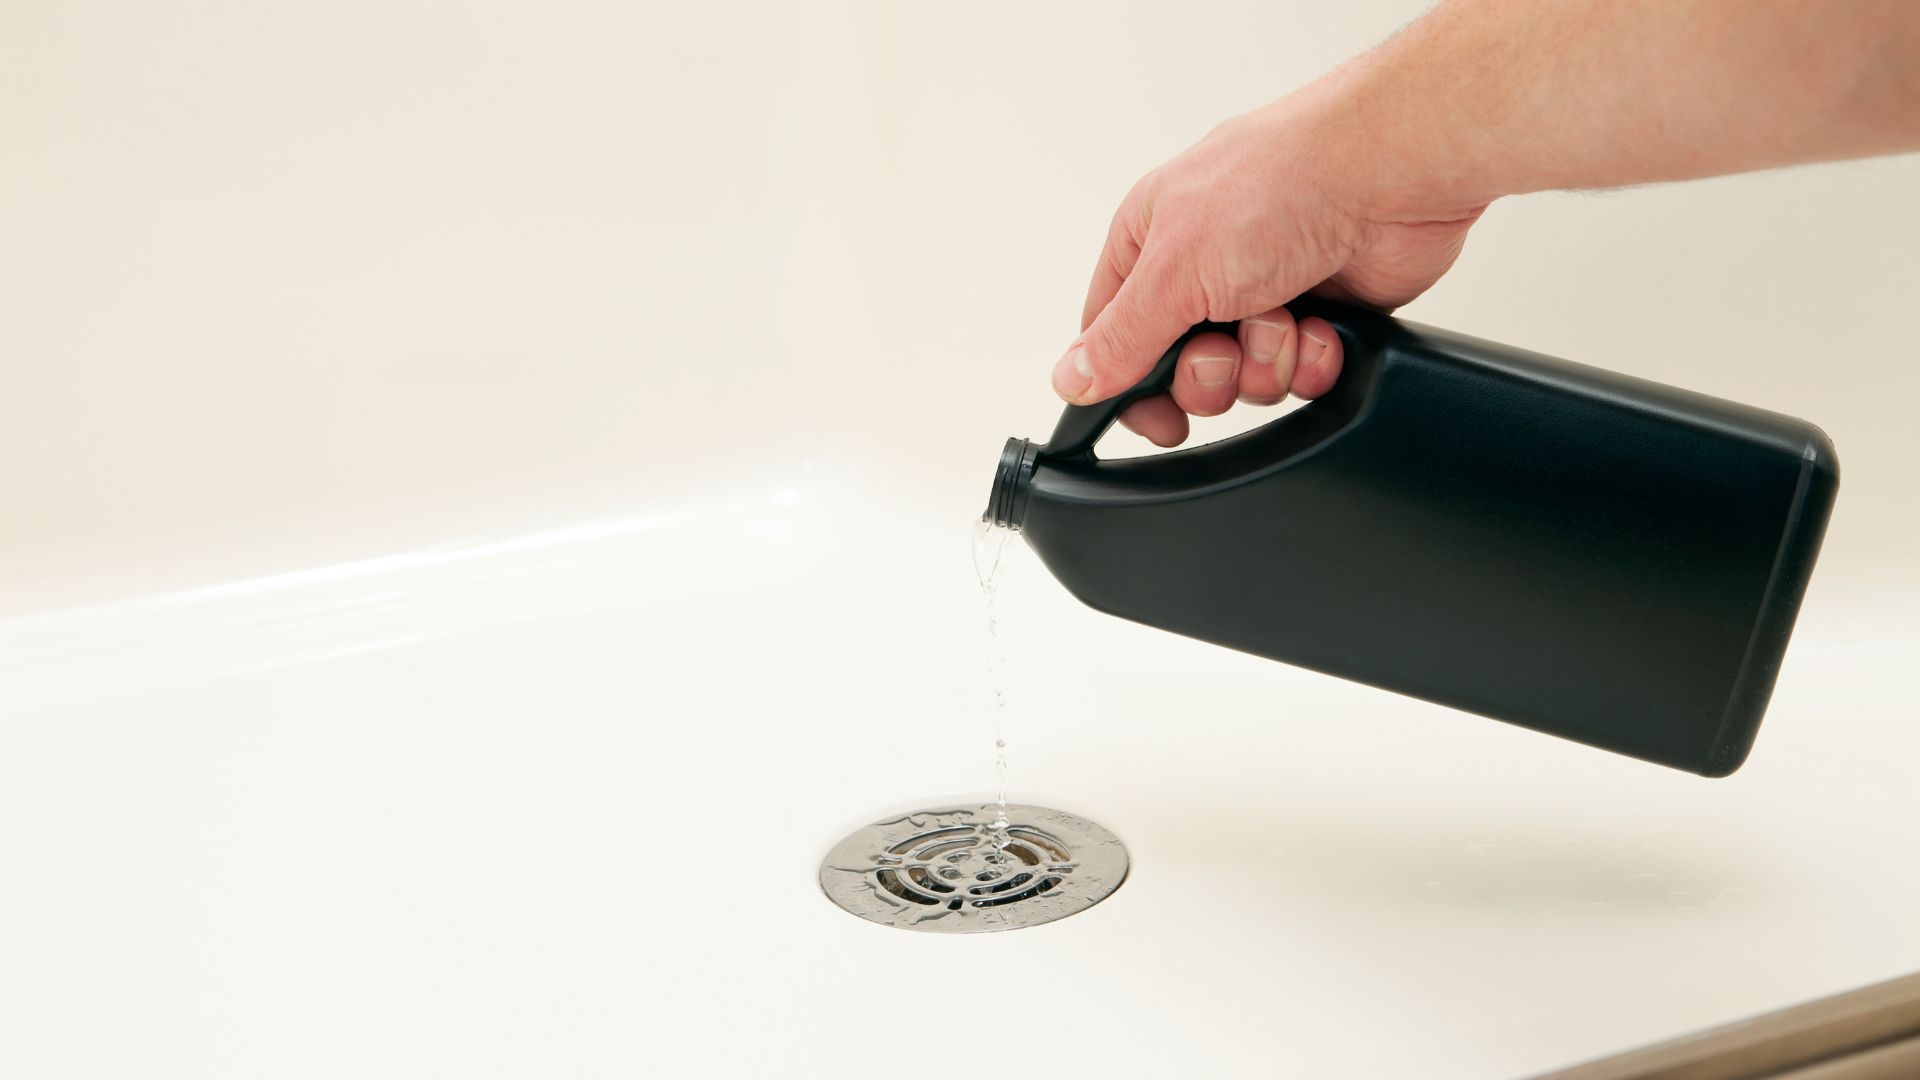 Using Chemical Drain Cleaners Safely by plumbers